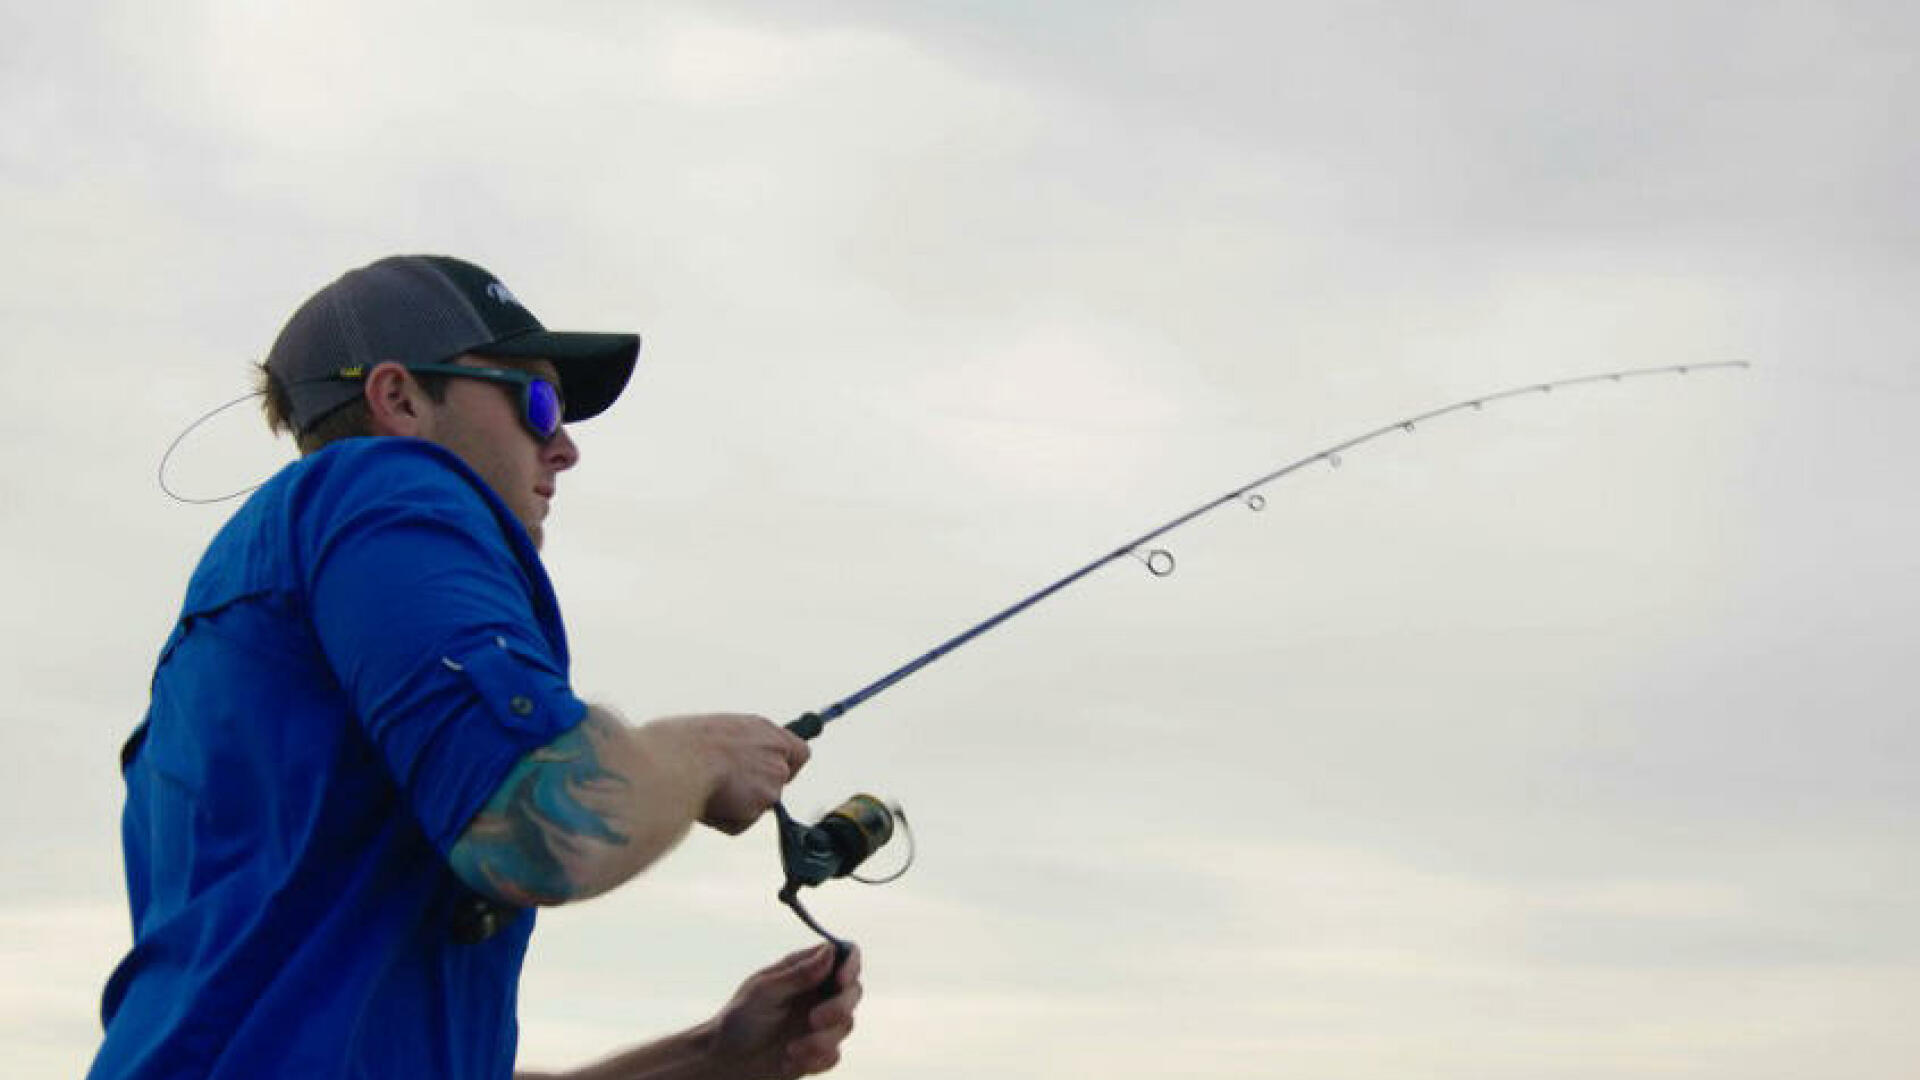 Saltwater  Spinning vs. Casting Rods with Capt. Michael Sharky